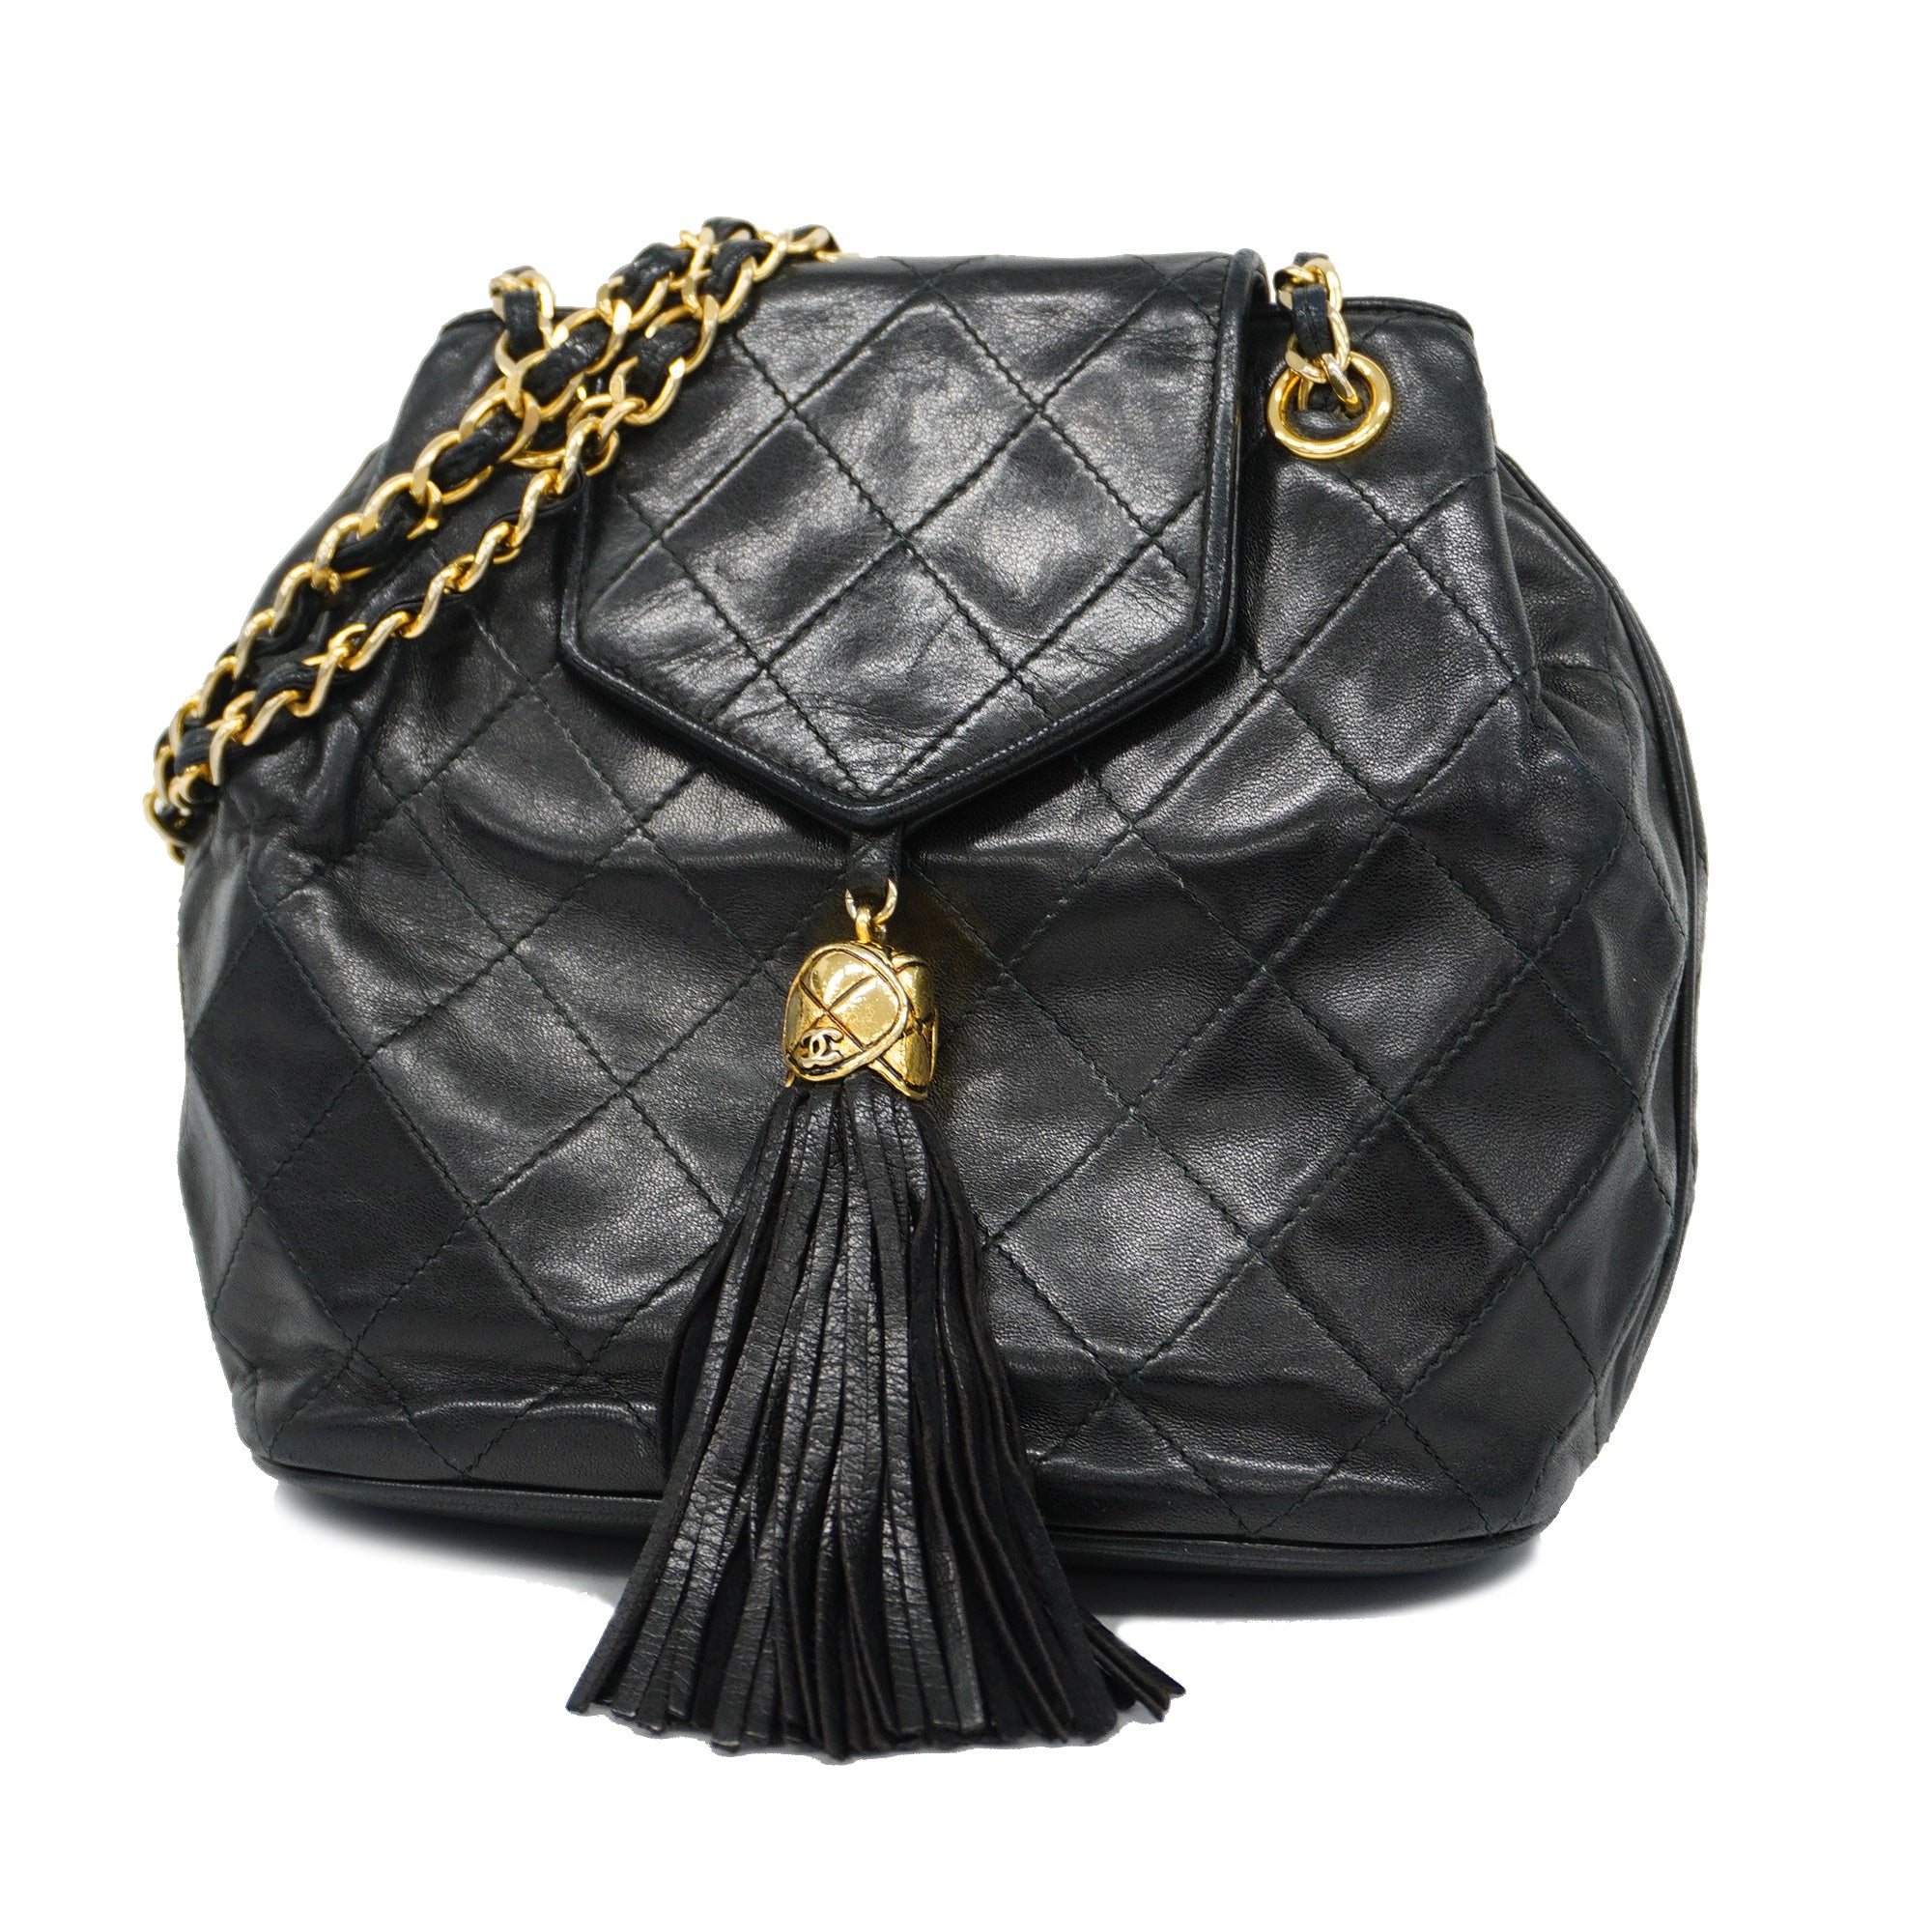 CHANELAuth Matelasse Chain Shoulder With Fringe Women's Leather Should